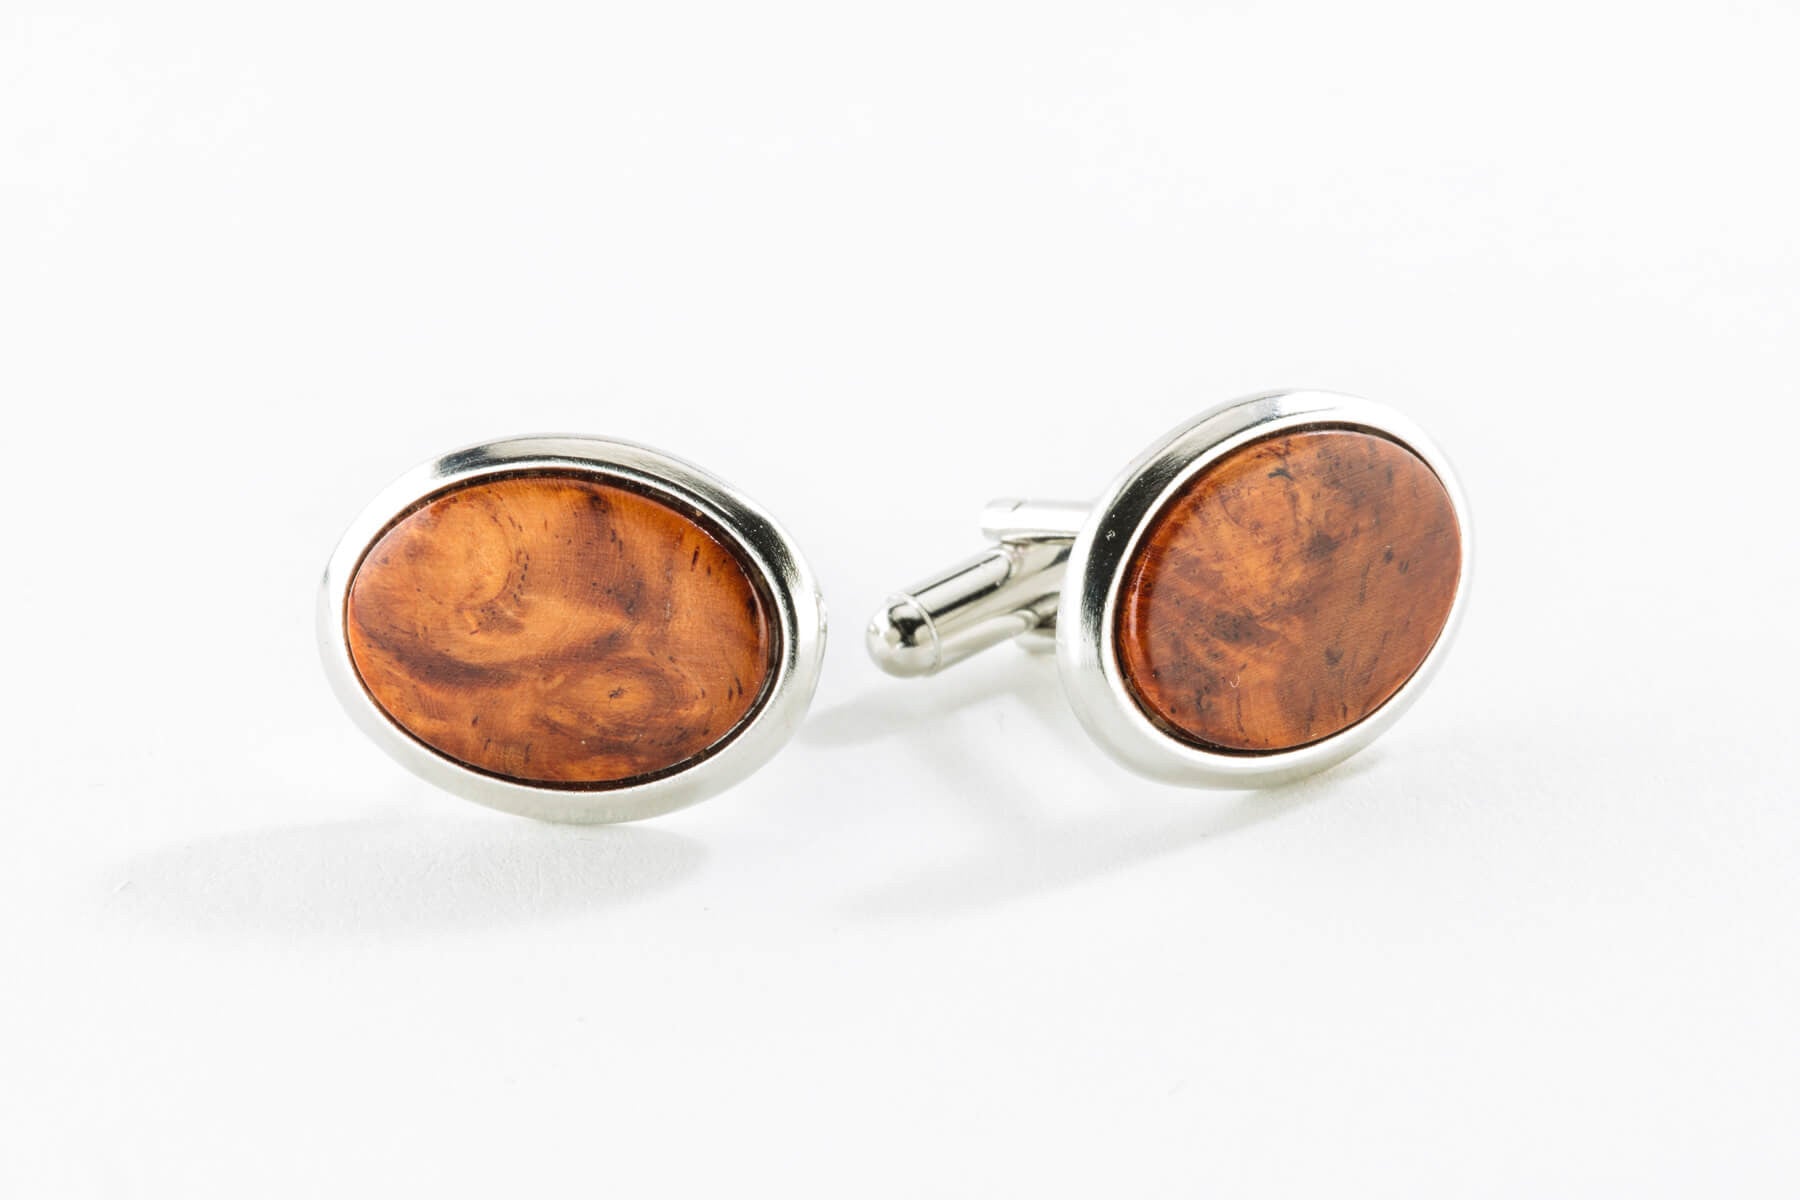 Cuff Links - Solid